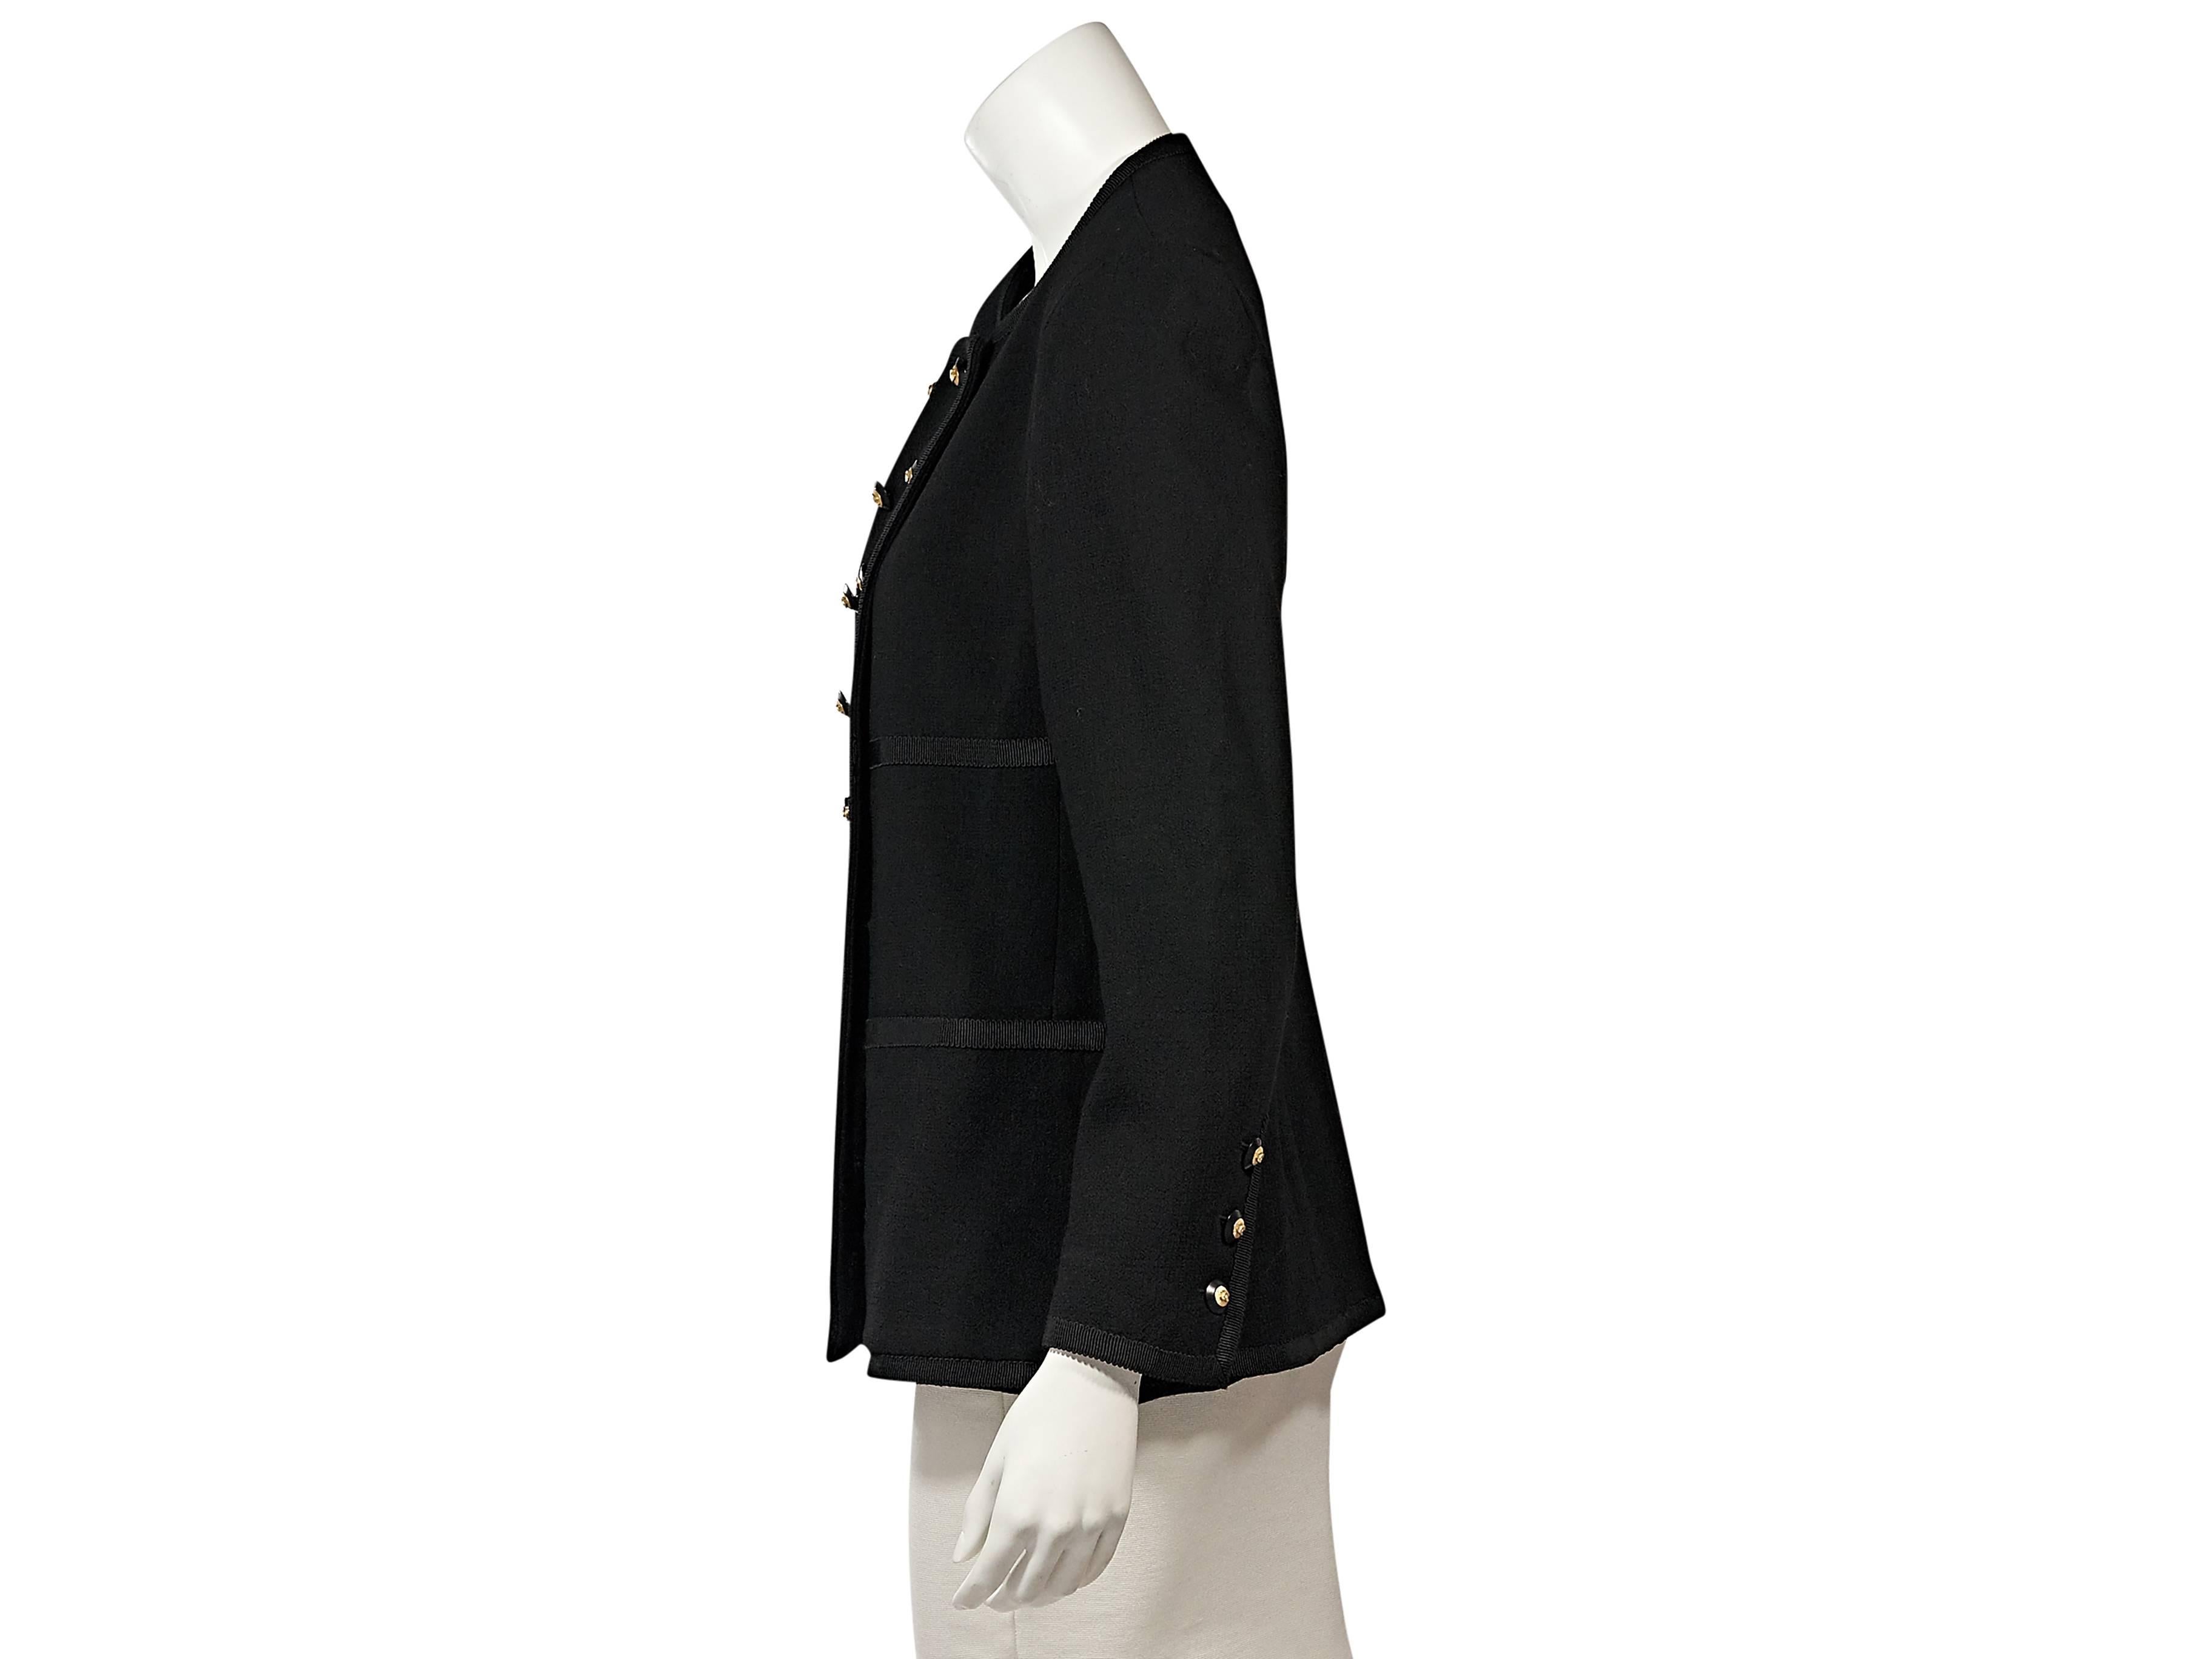 Product details:  Vintage black double-breasted jacket by Chanel.  Trimmed with grosgrain ribbon.  Crewneck.  Long sleeves.  Three-button detail at cuffs.  Double-breasted button front.  Waist patch pockets.  
Condition: Very good. 